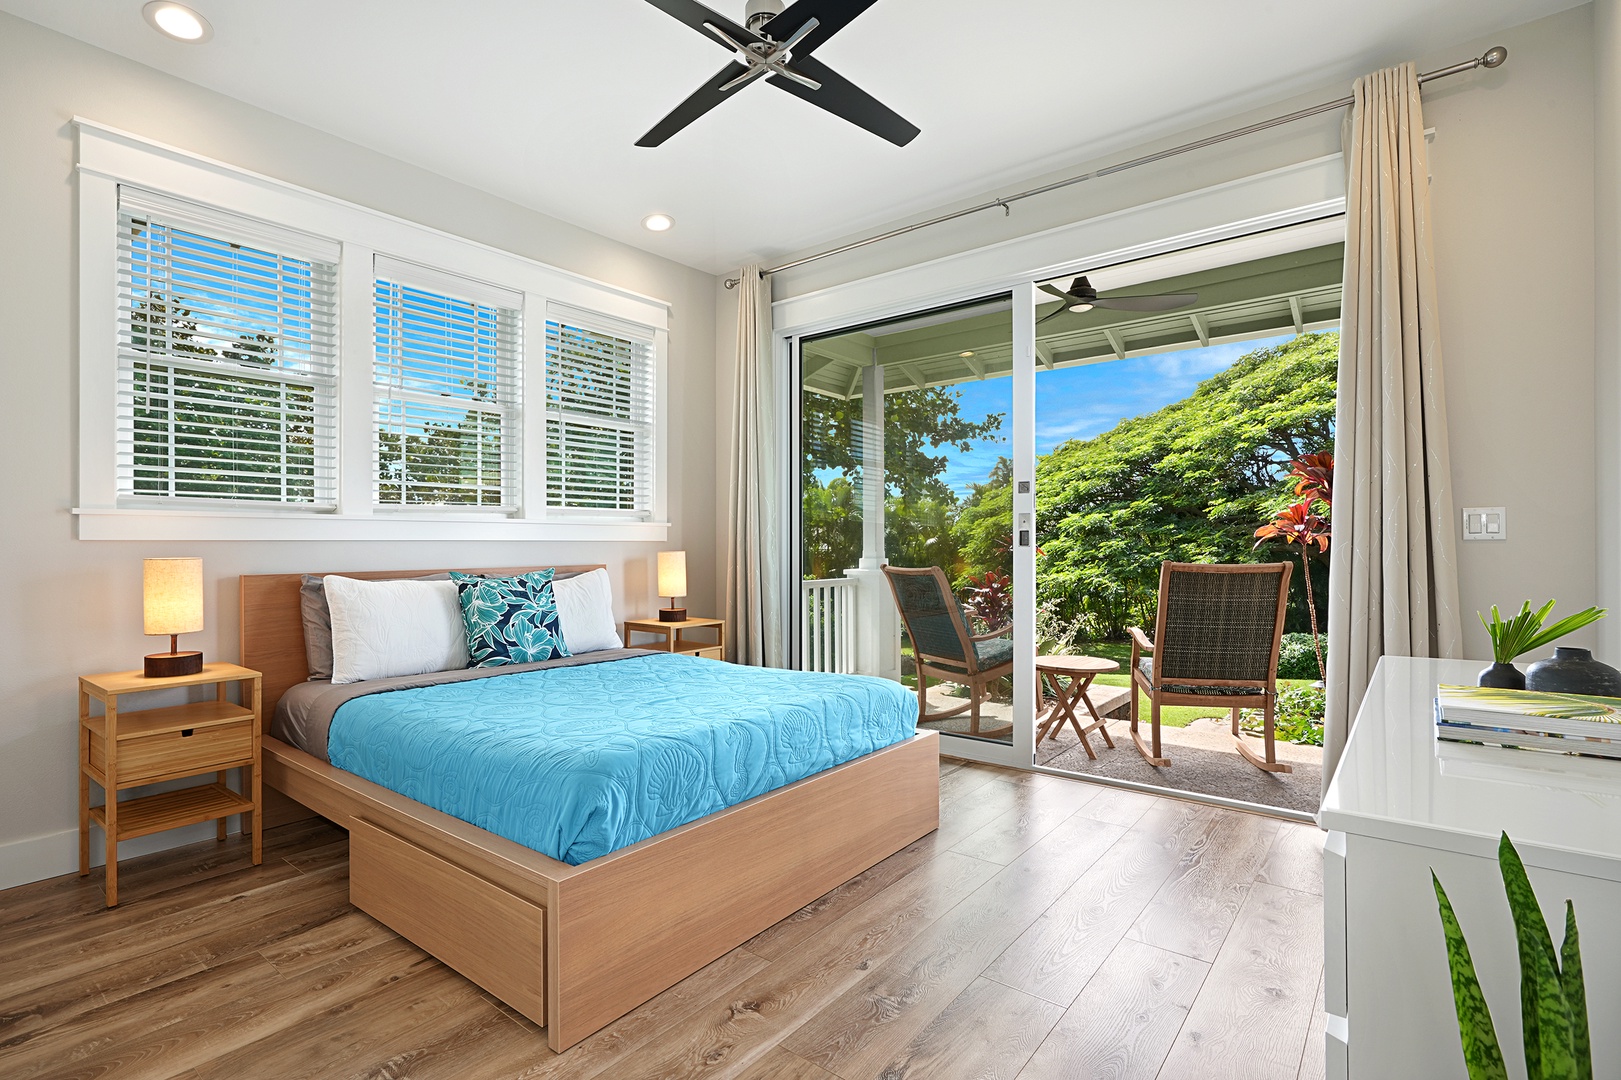 Koloa Vacation Rentals, JC Surf House - Primary bedroom downstairs with AC, ensuite bathroom, and lanai